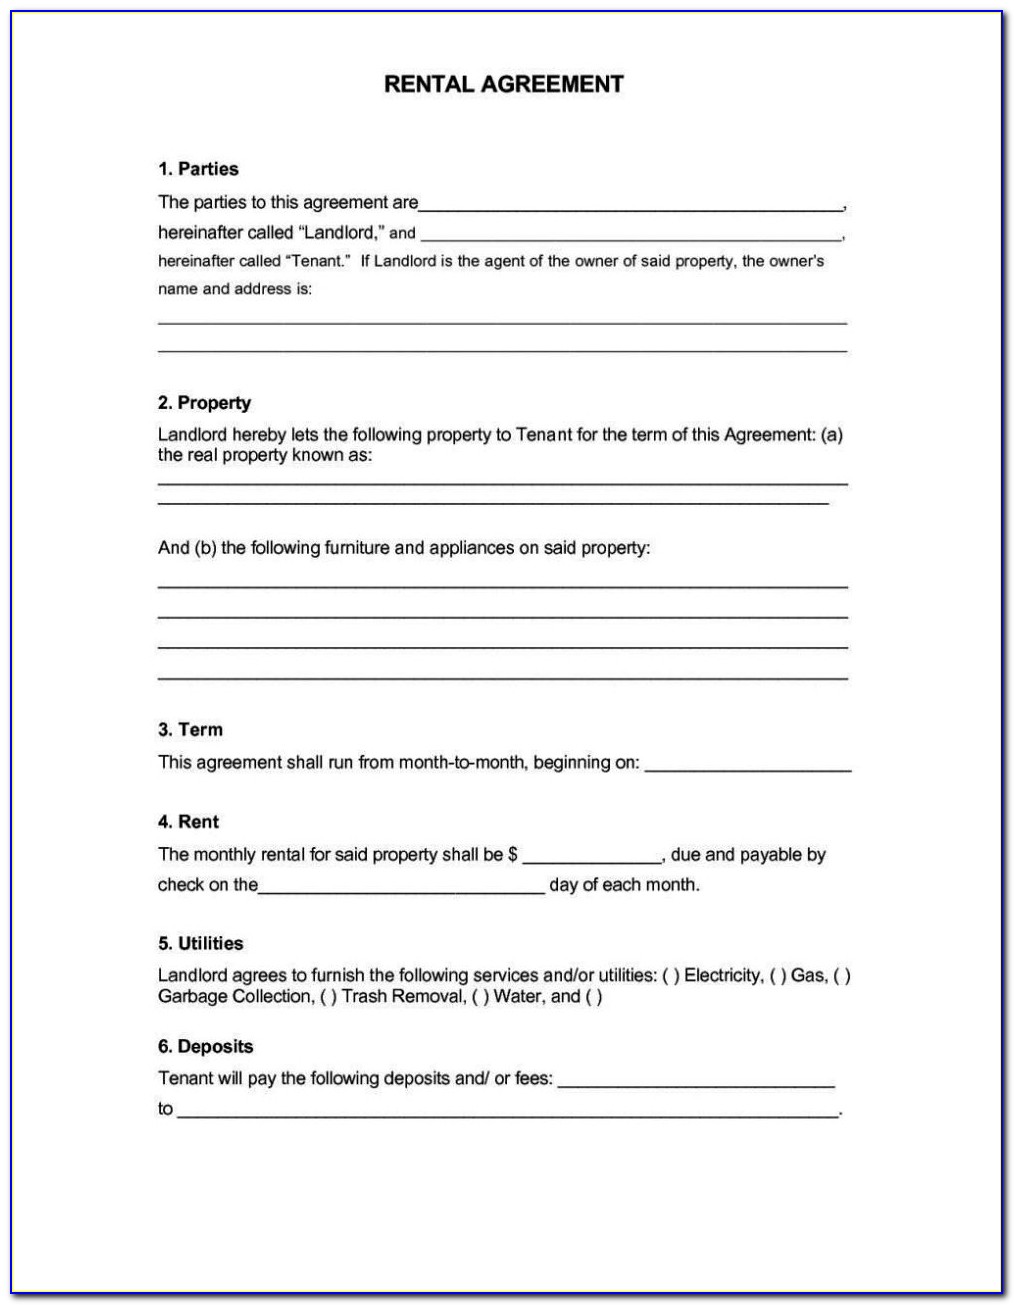 Office Space Lease Agreement Template Free